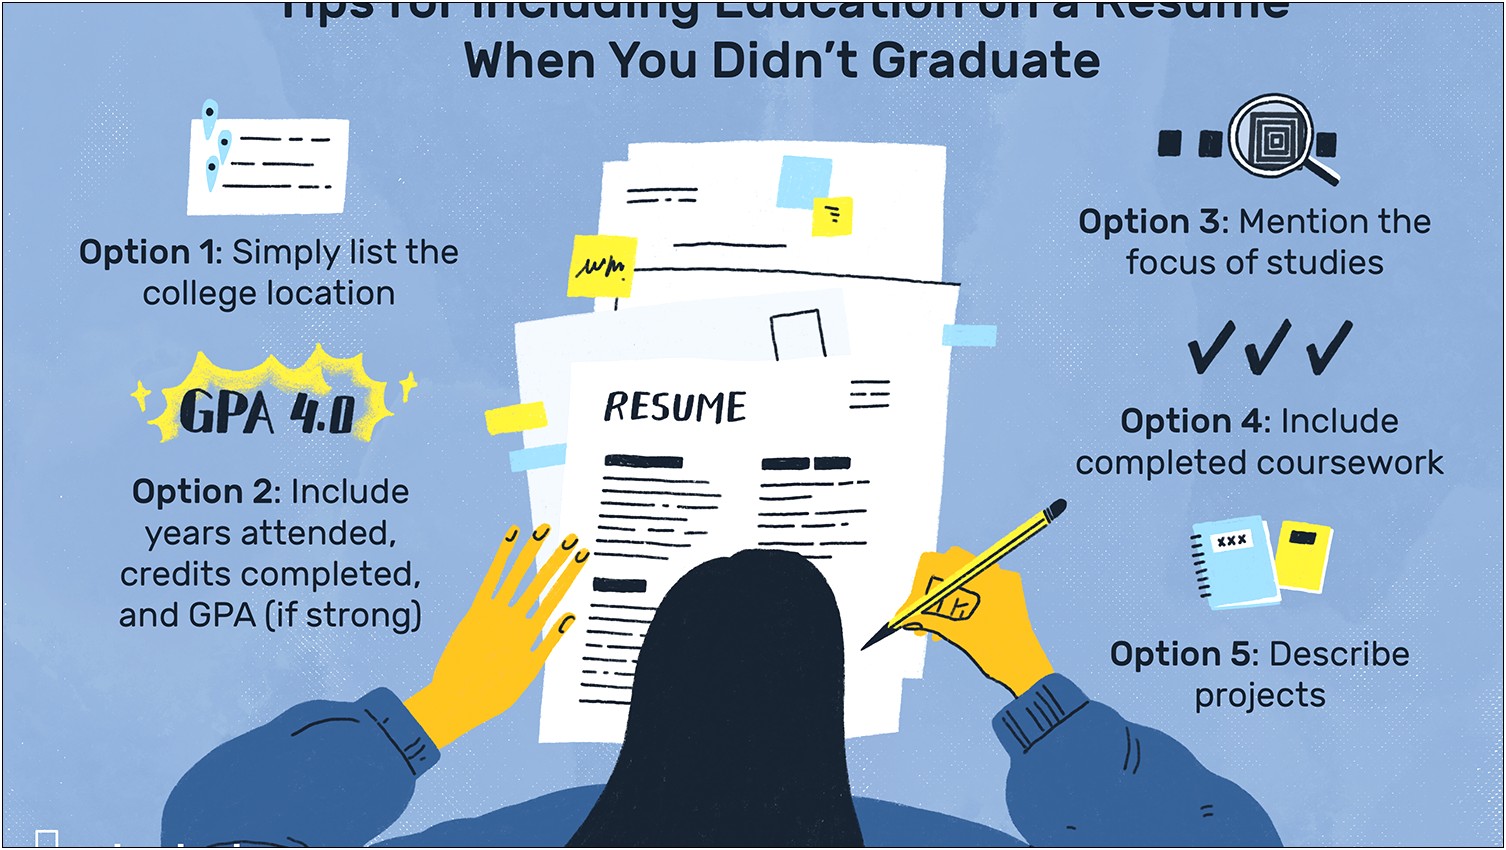 Resume Schools Where You Did Not Graduate